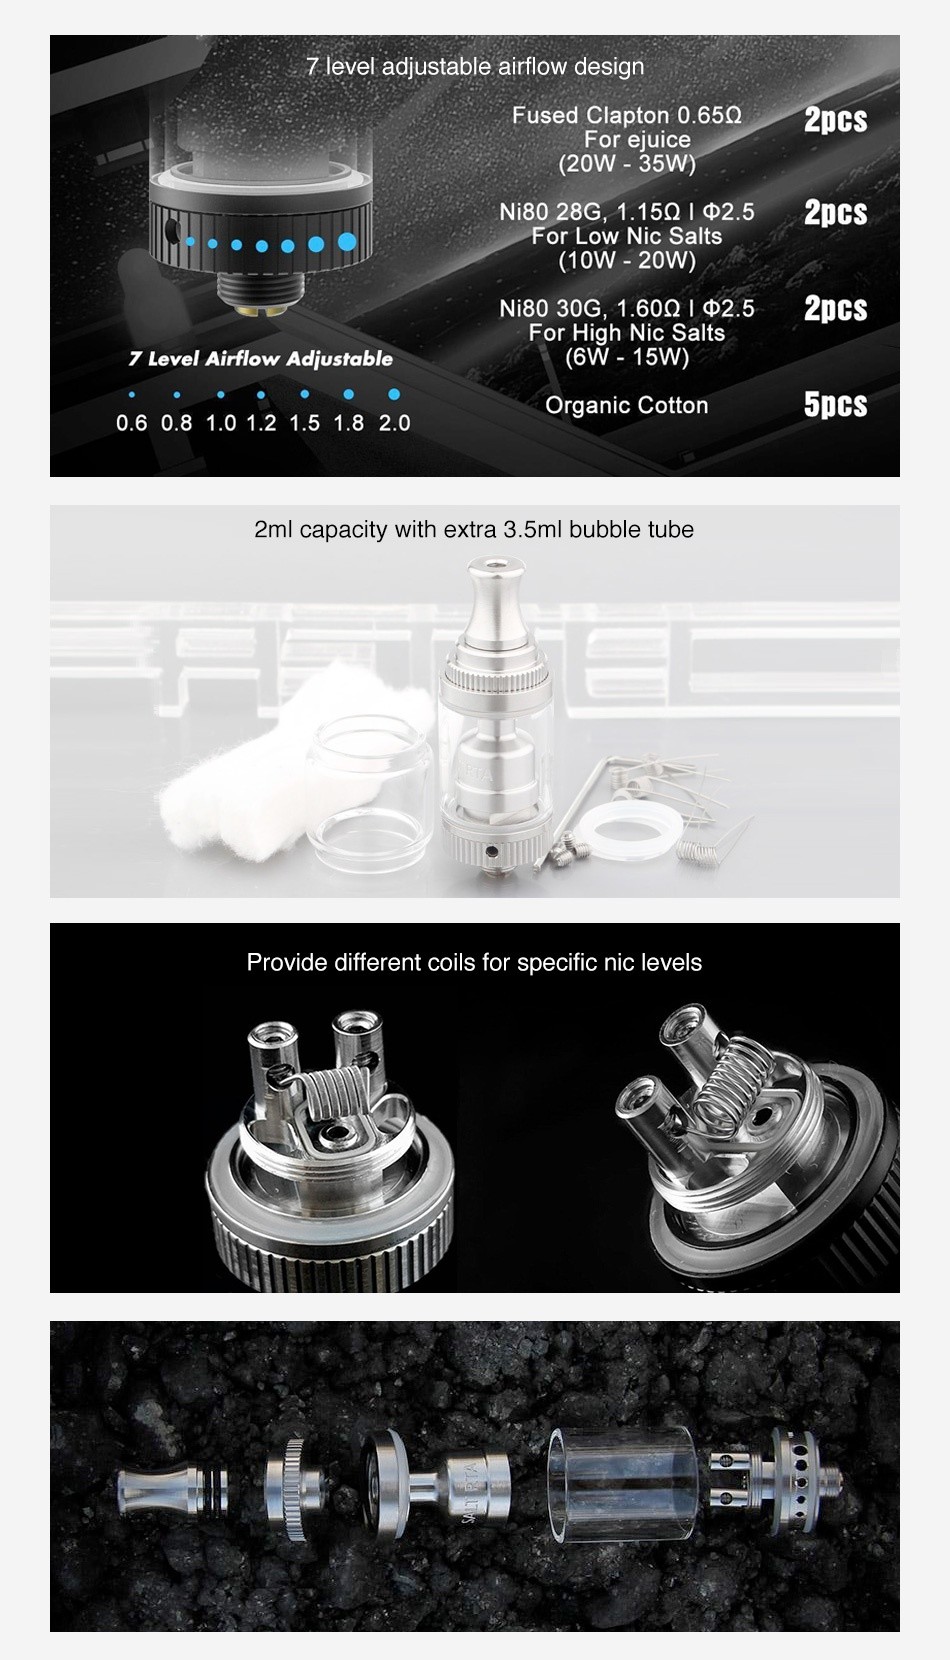 CoilART SALT RTA 2ml 7 level adjustable airflow design Fused Clapton 0 65Q2 2pcs For juice  20W 35W  N8028G 115  2520c 0   For Low Nic Salts  10W 20W  N8030G 160  2 52pcs For high Nic salts 7 Level Airflow Adjustable  6W 15W  0 6081 01 21 51 82 0 Organic Cotton 5pcs 2ml capacity with extra 3 5ml bubble tube Provide different coils for specific nic levels